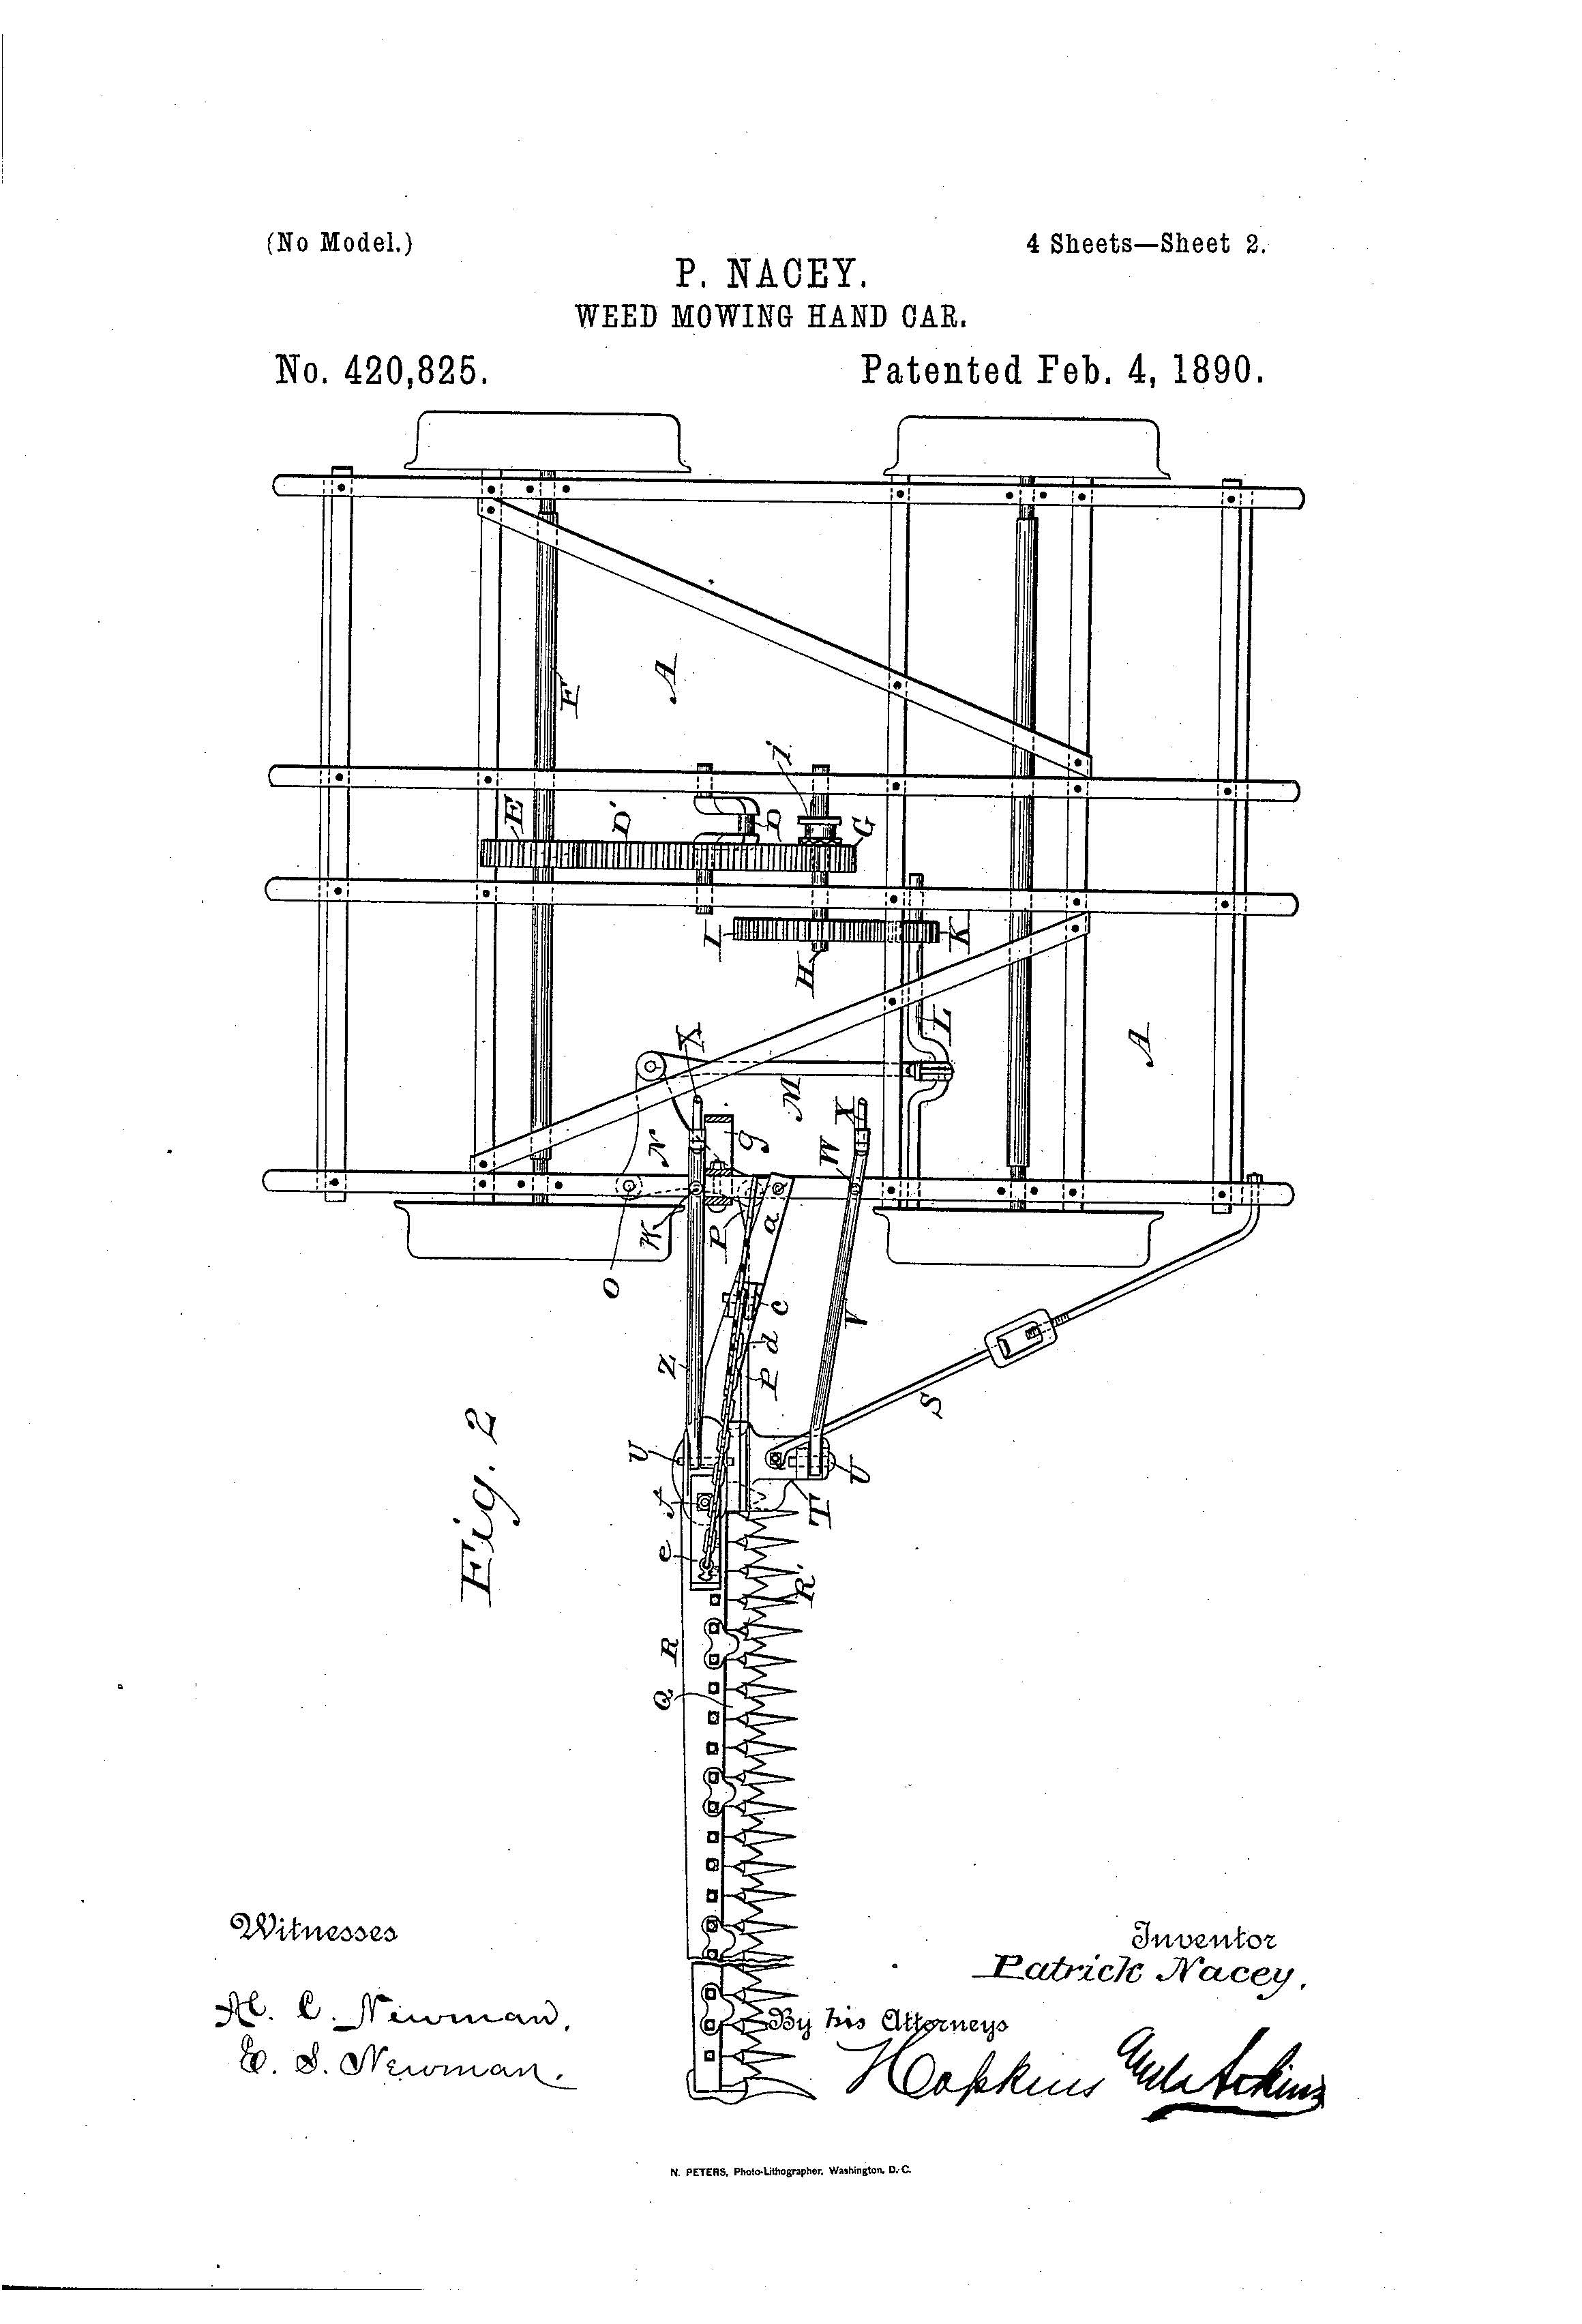 Patent-Illustration_Weed-Mowing-Hand-Car_Page_2